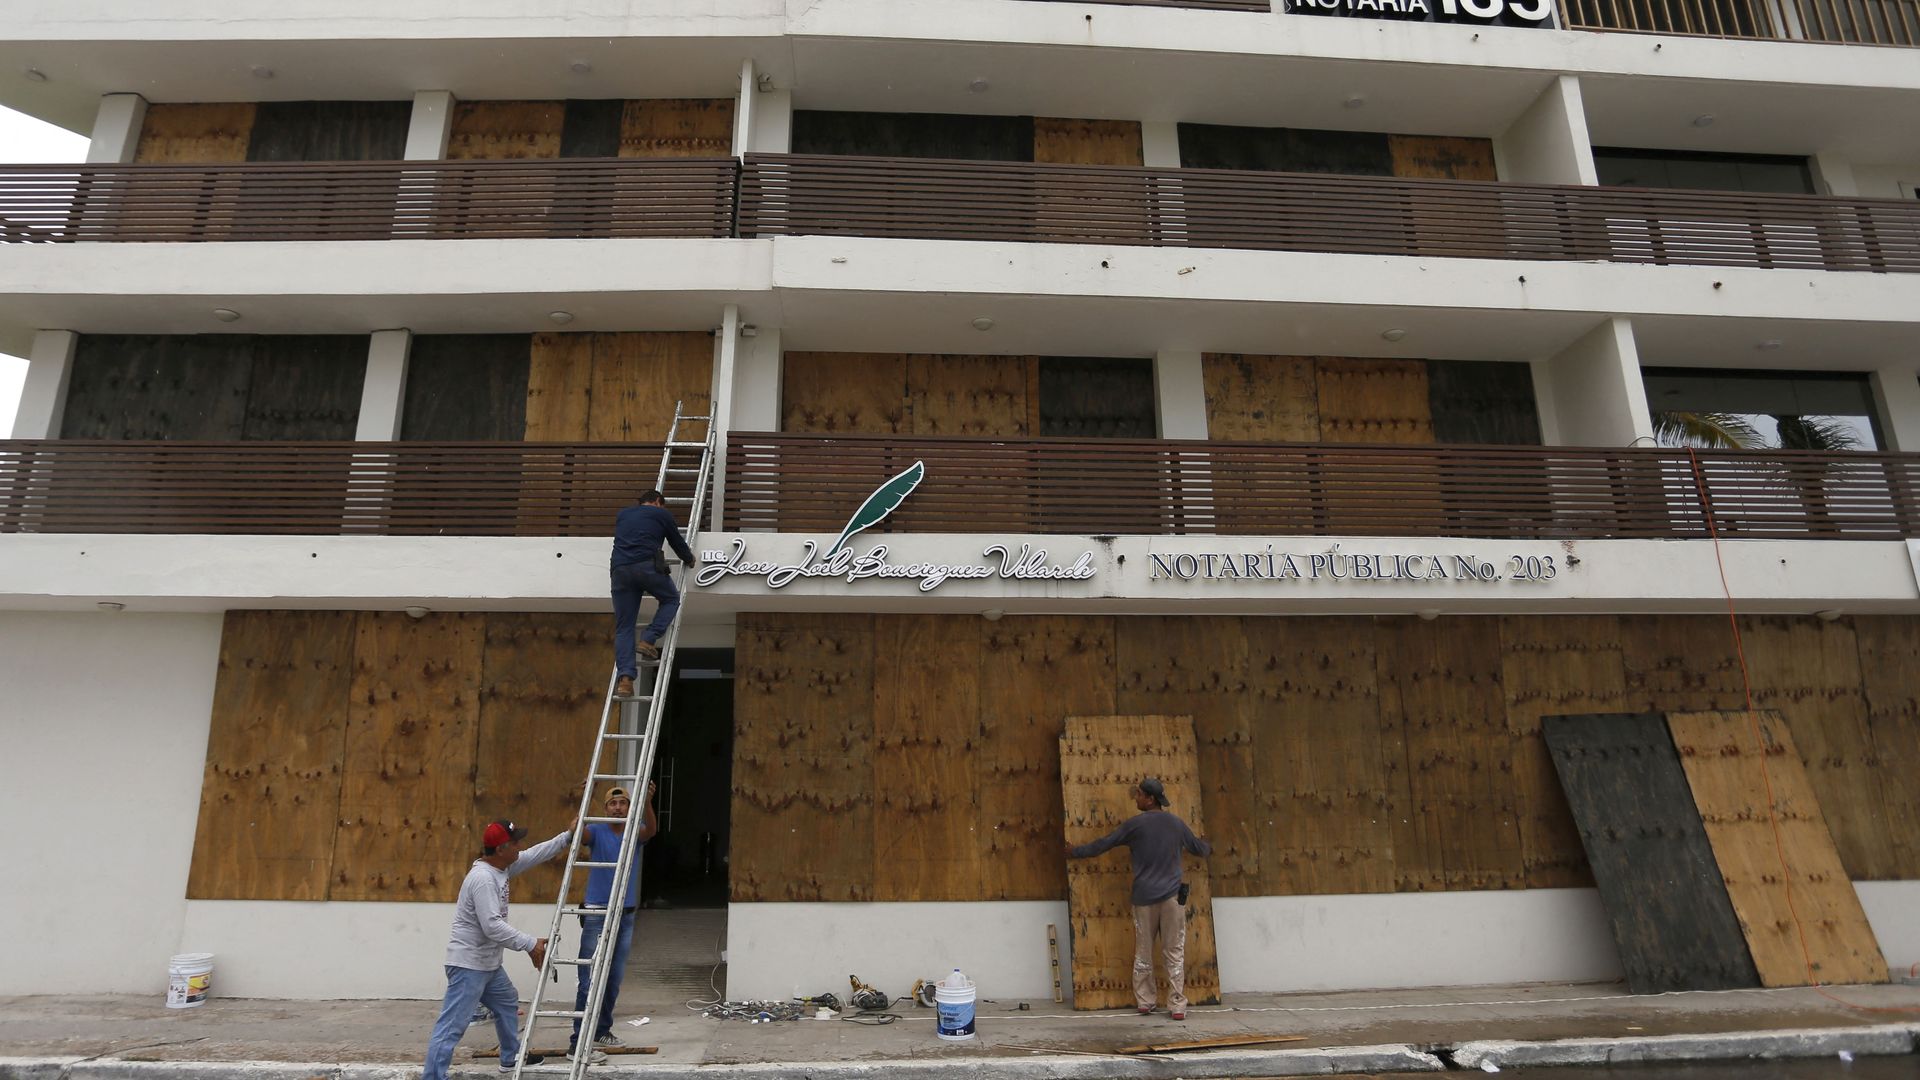 Men board up a seafront building ahead of the arrival of Hurricane Orlene, in Mazatlan, state of Sinaloa, Mexico